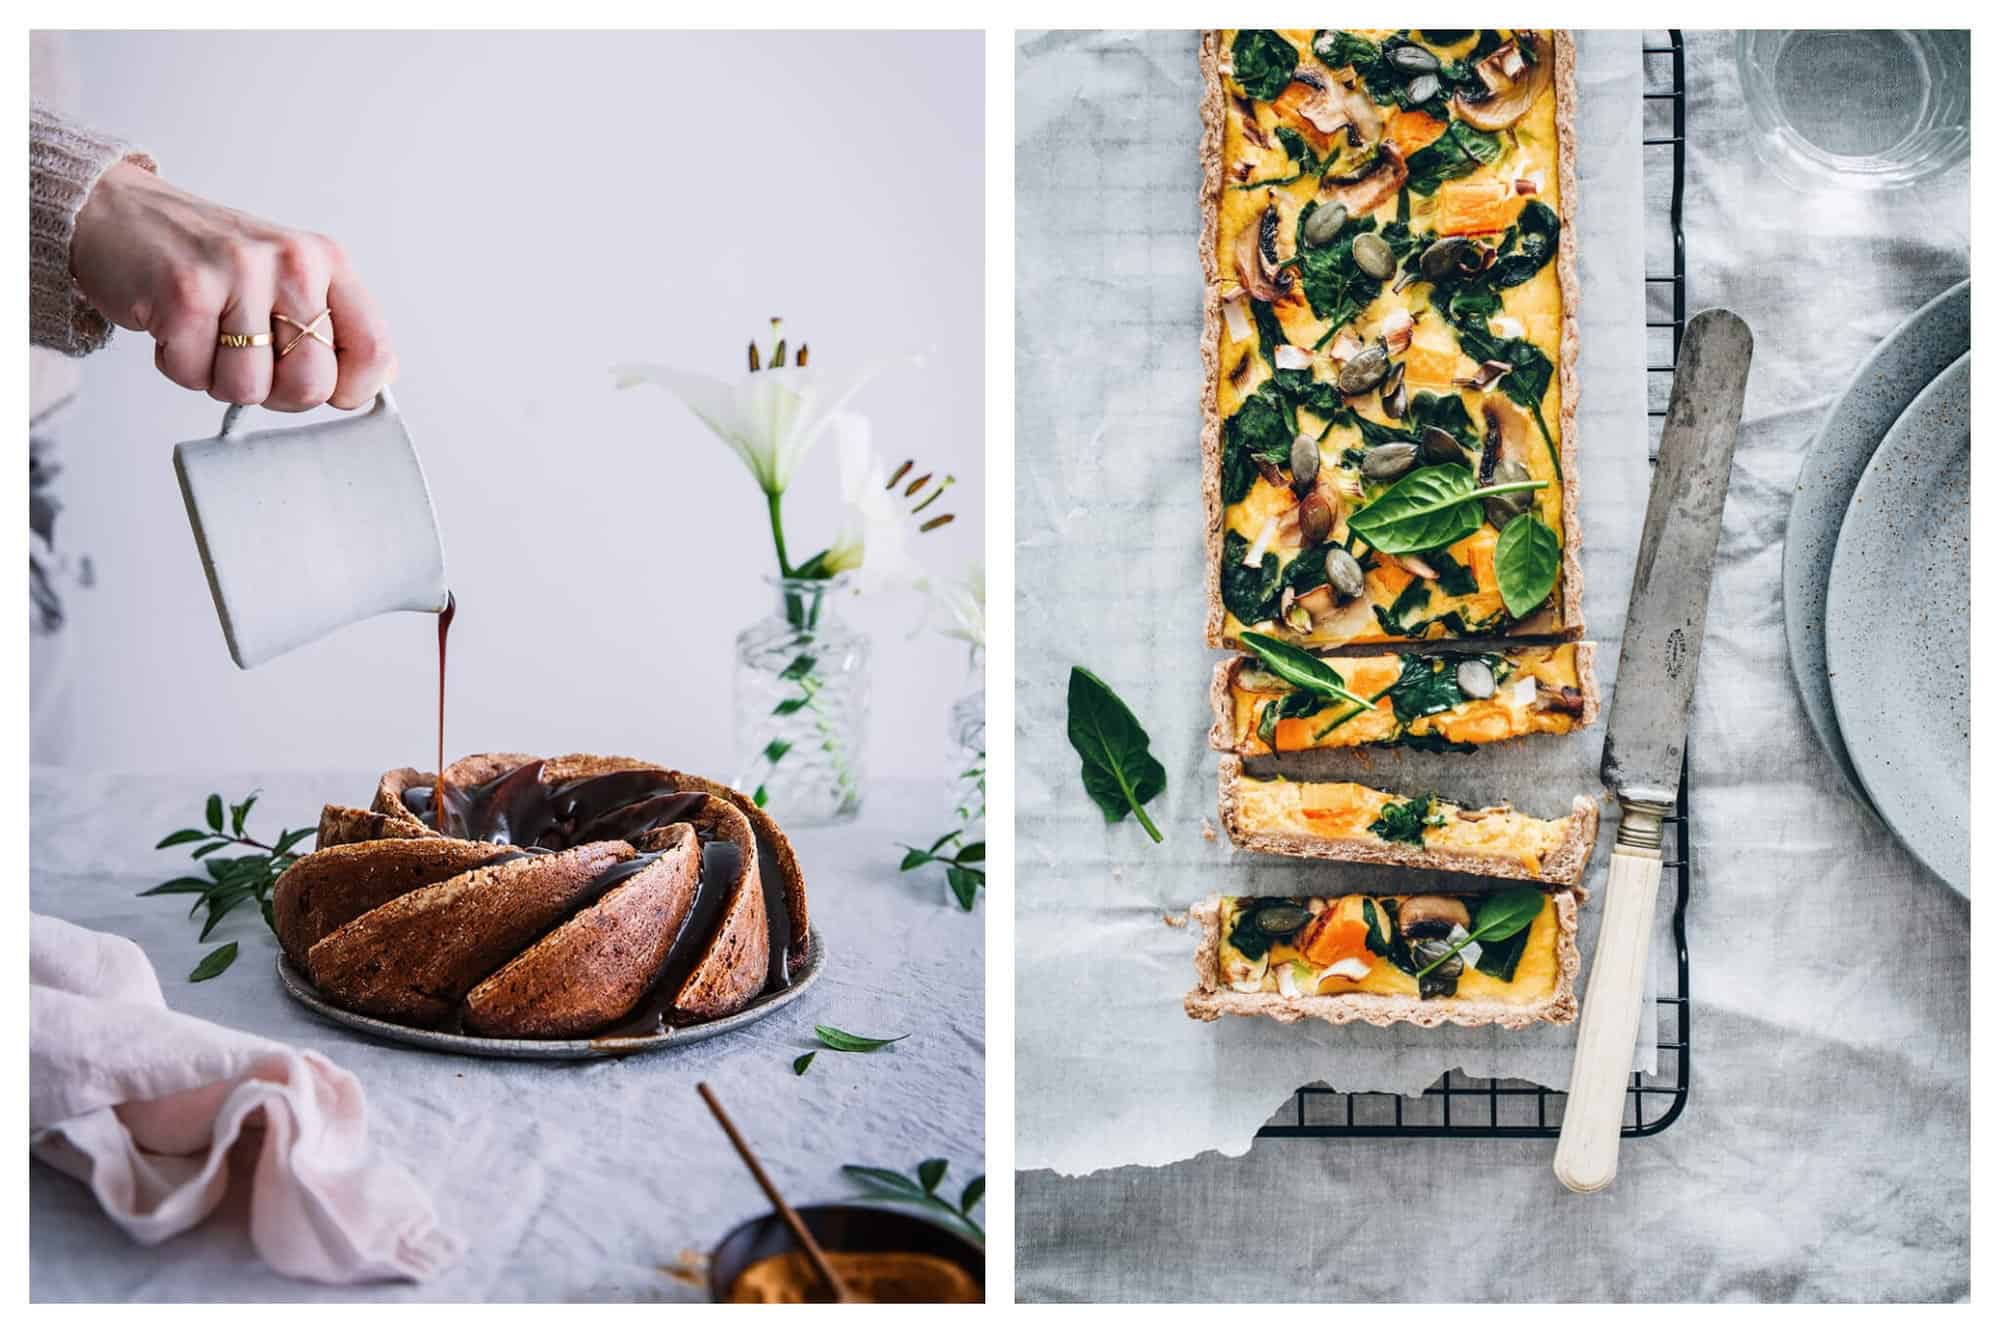 Left: A chocolate syrup is being poured on top of a cake, resting in the middle of a table. Right: A tart with spinach, squash, and mushrooms has been sliced up and is resting on top of parchment paper. The knife is pictured next to the tart. 